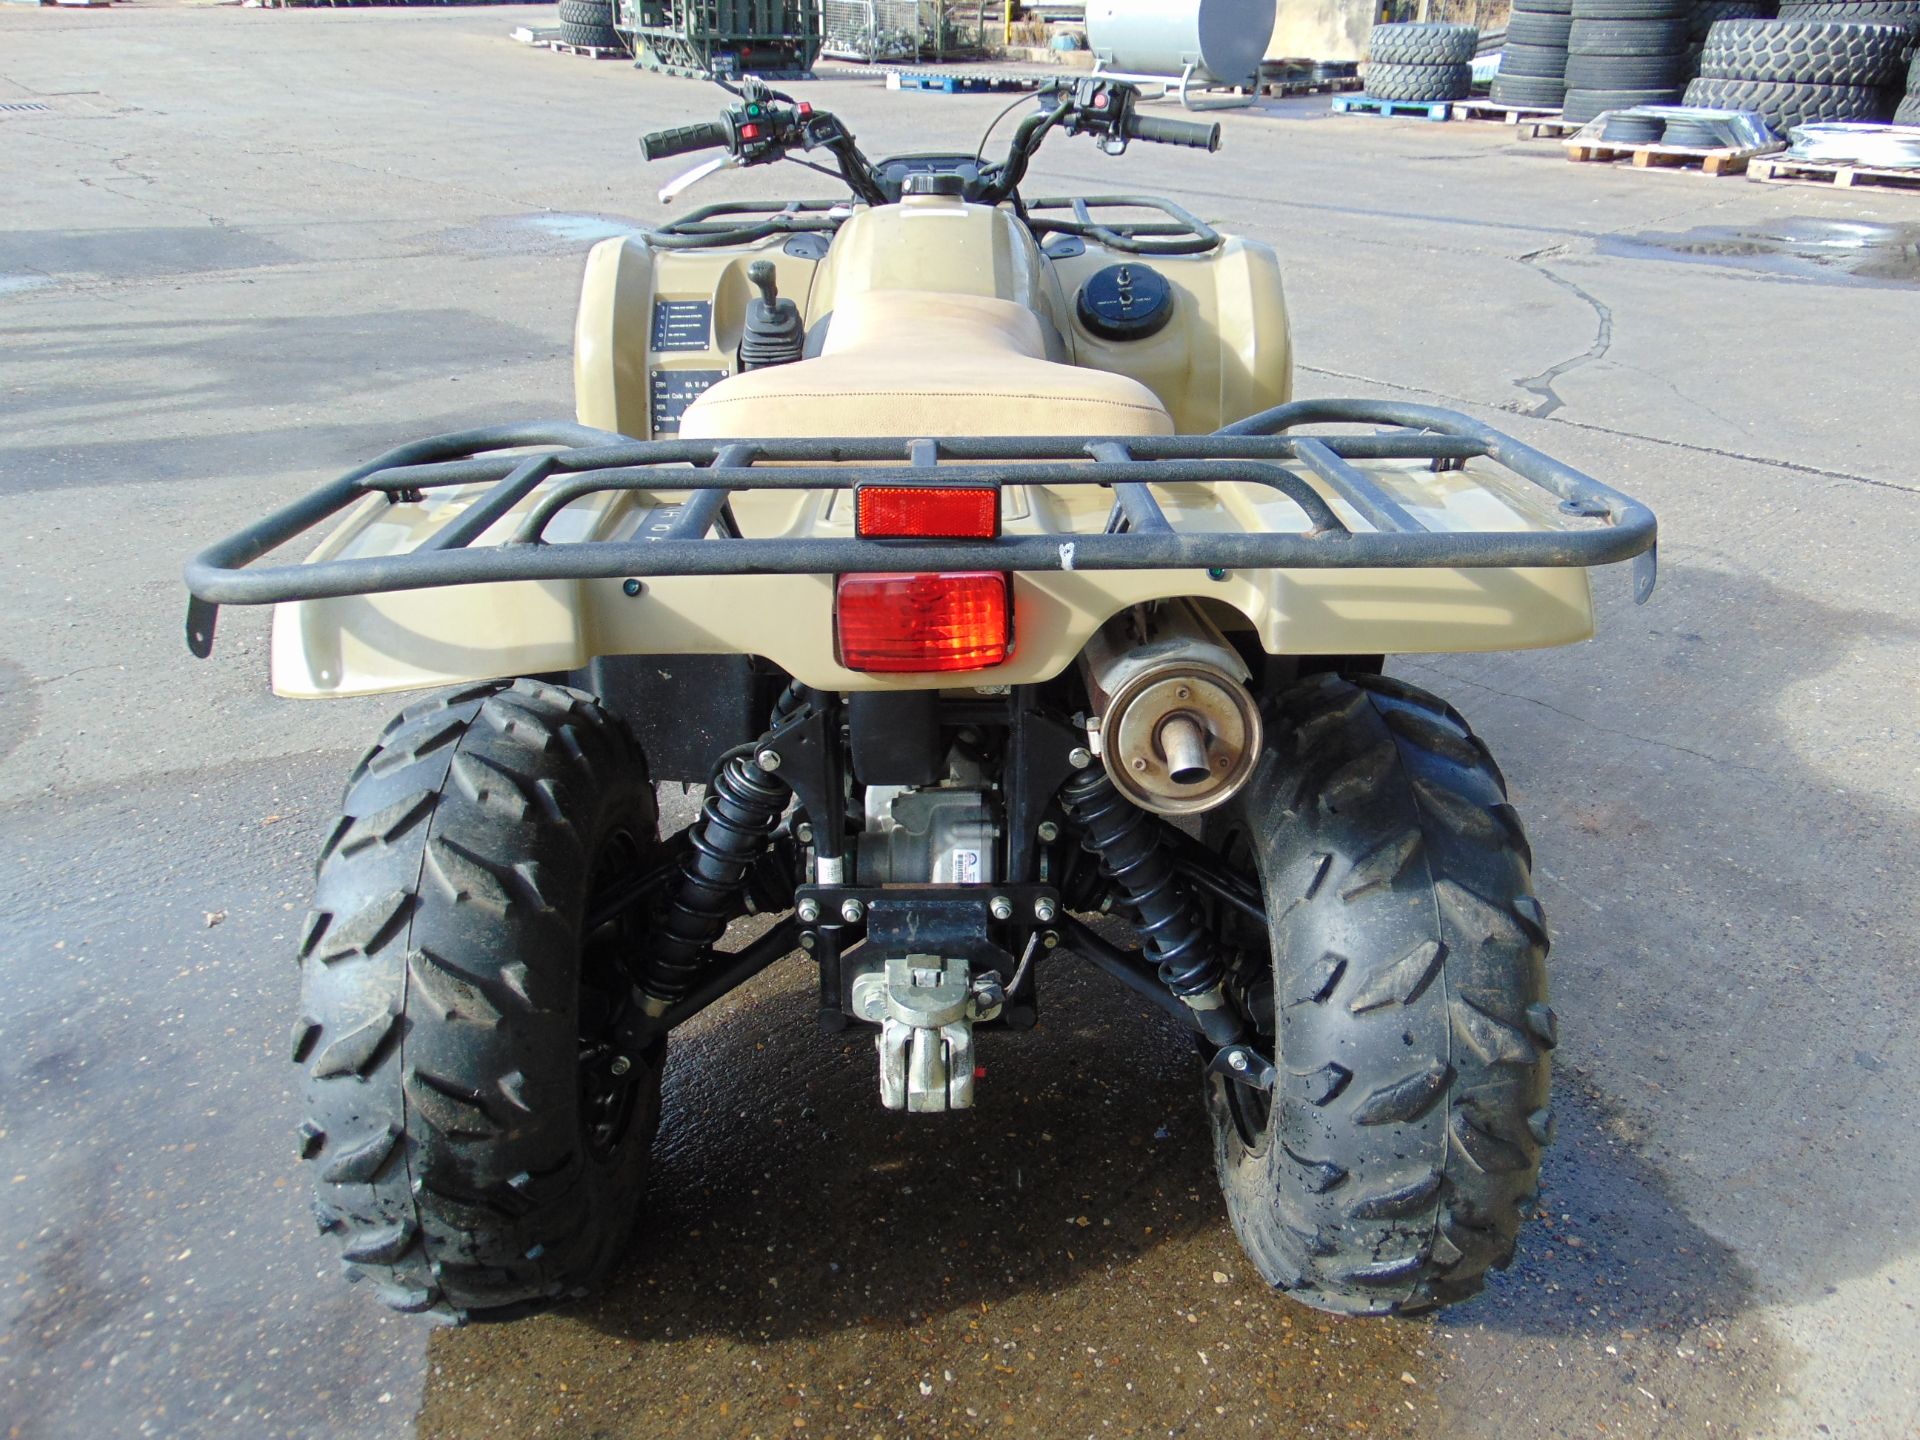 Military Specification Yamaha Grizzly 450 4 x 4 ATV Quad Bike ONLY 214 HOURS!!! - Image 7 of 22